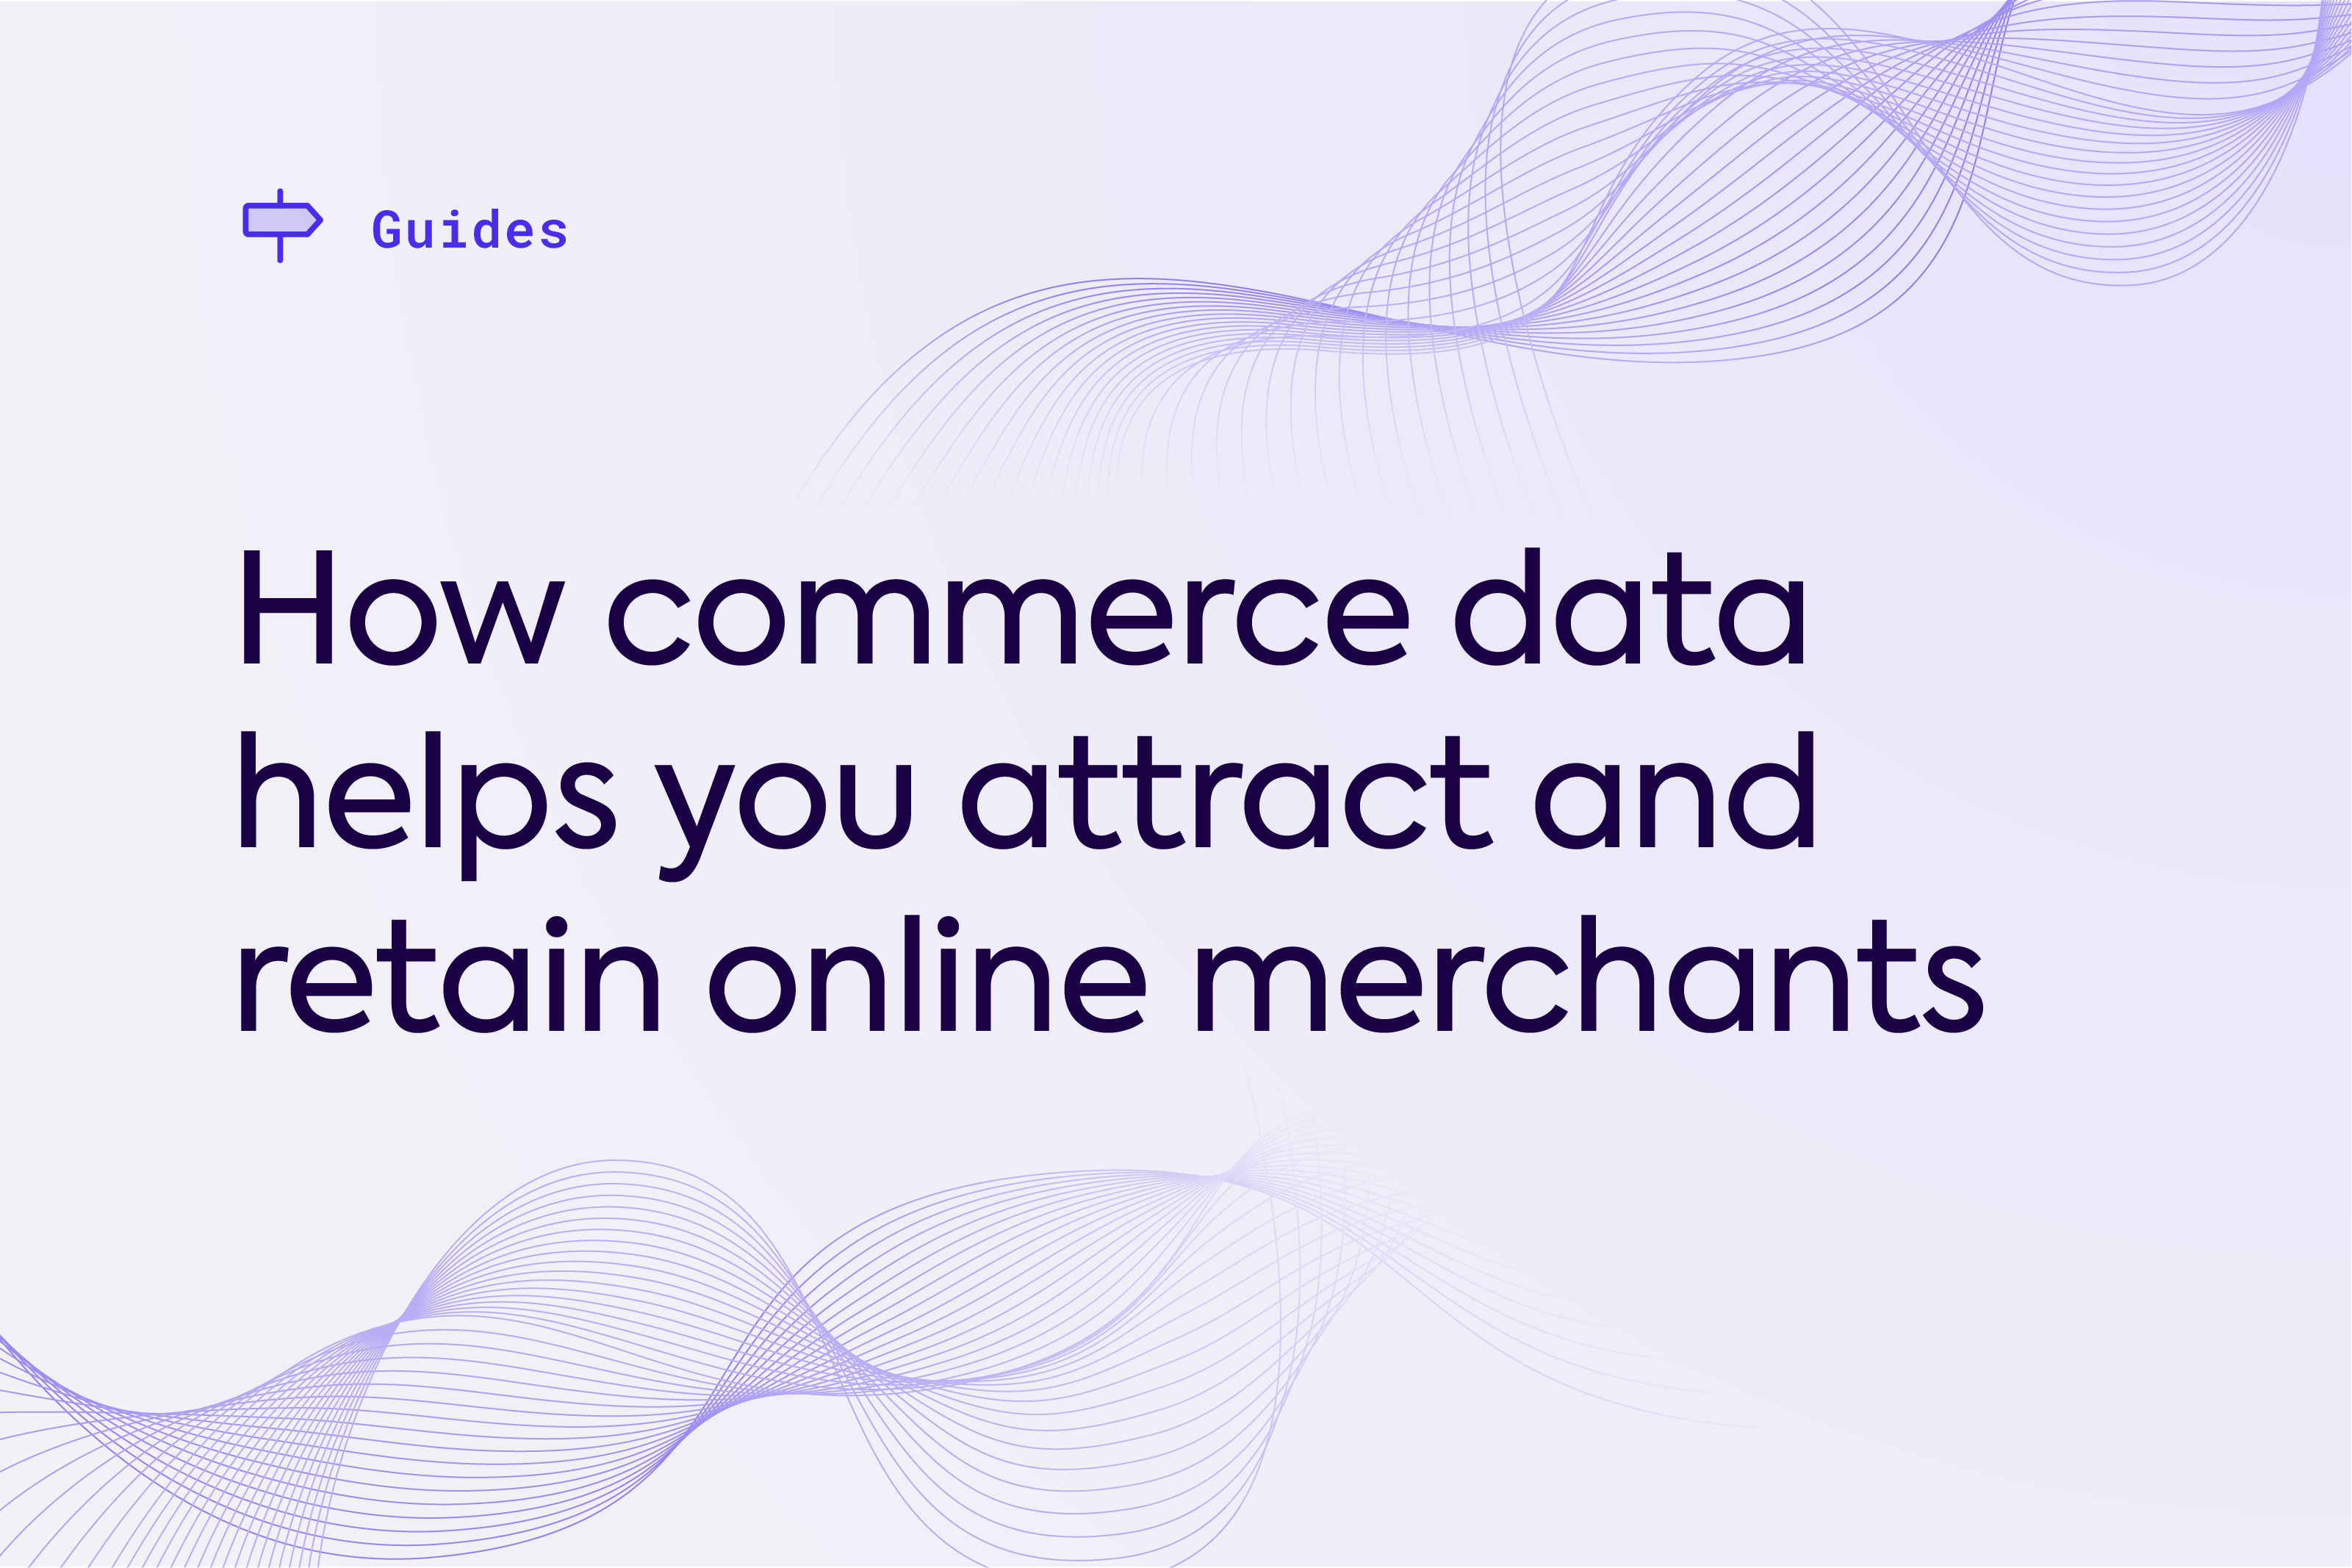 How commerce data helps you win customers